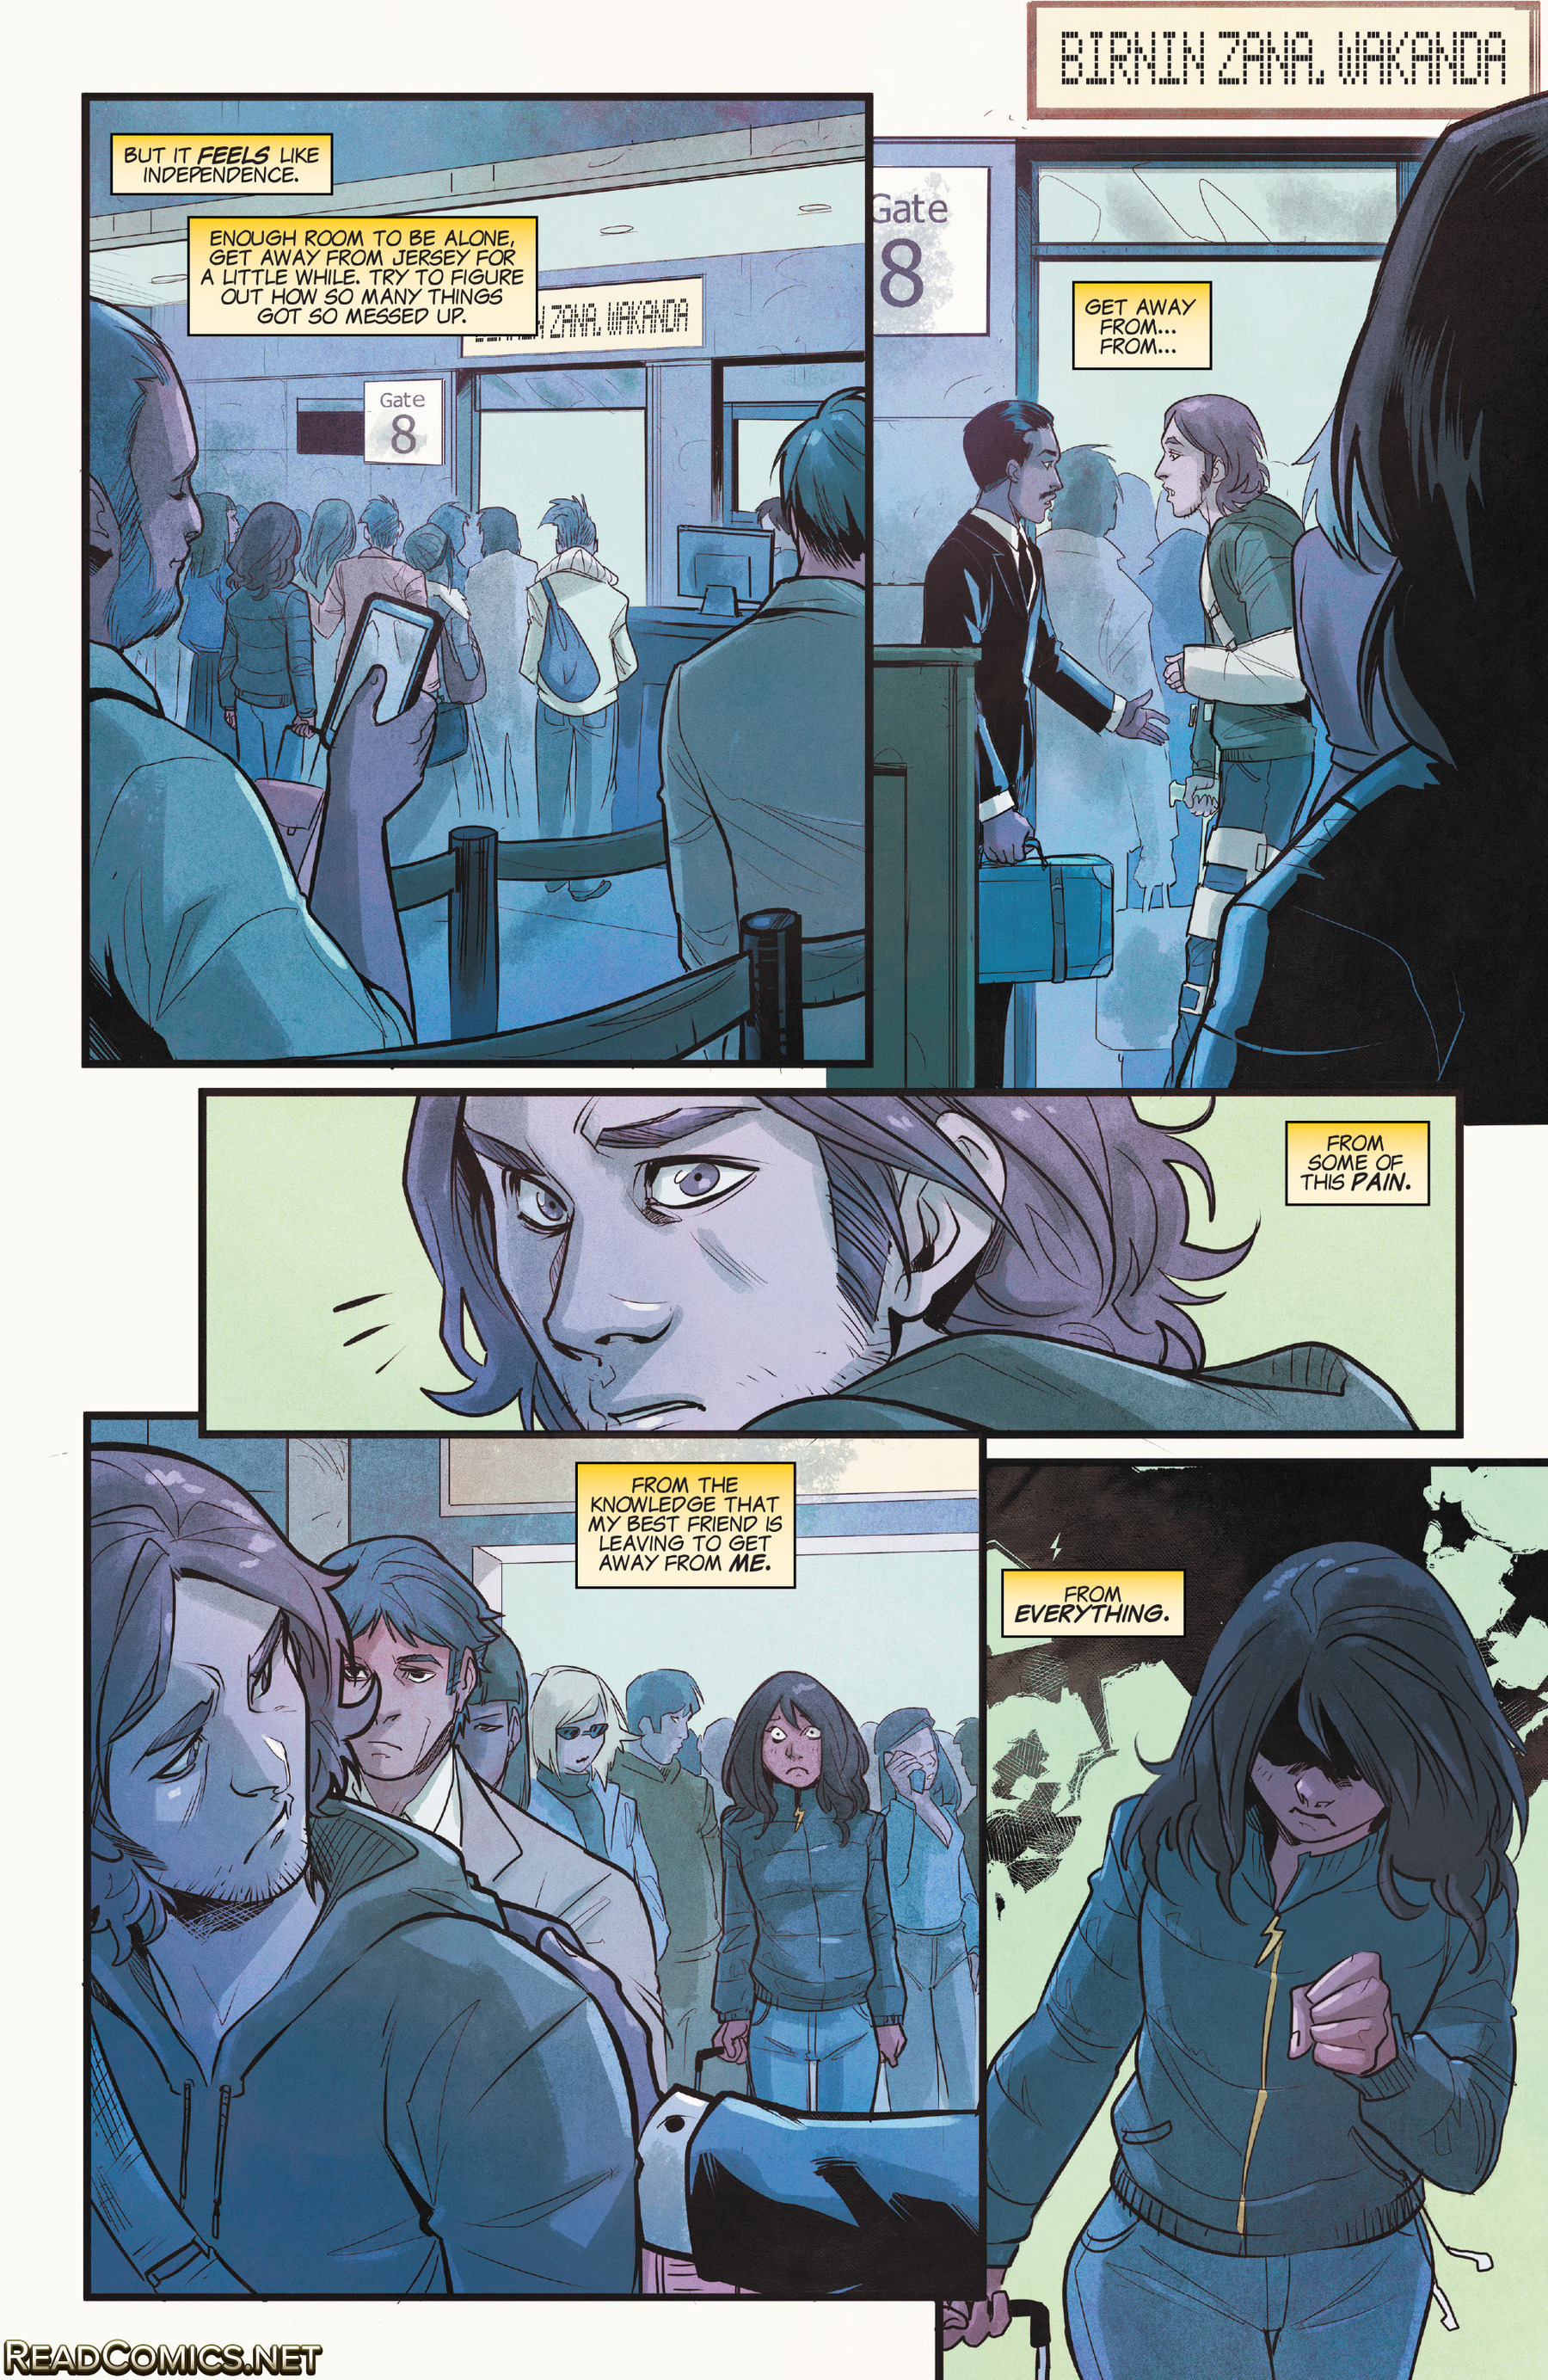 Ms. Marvel (2015-): Chapter 12 - Page 3